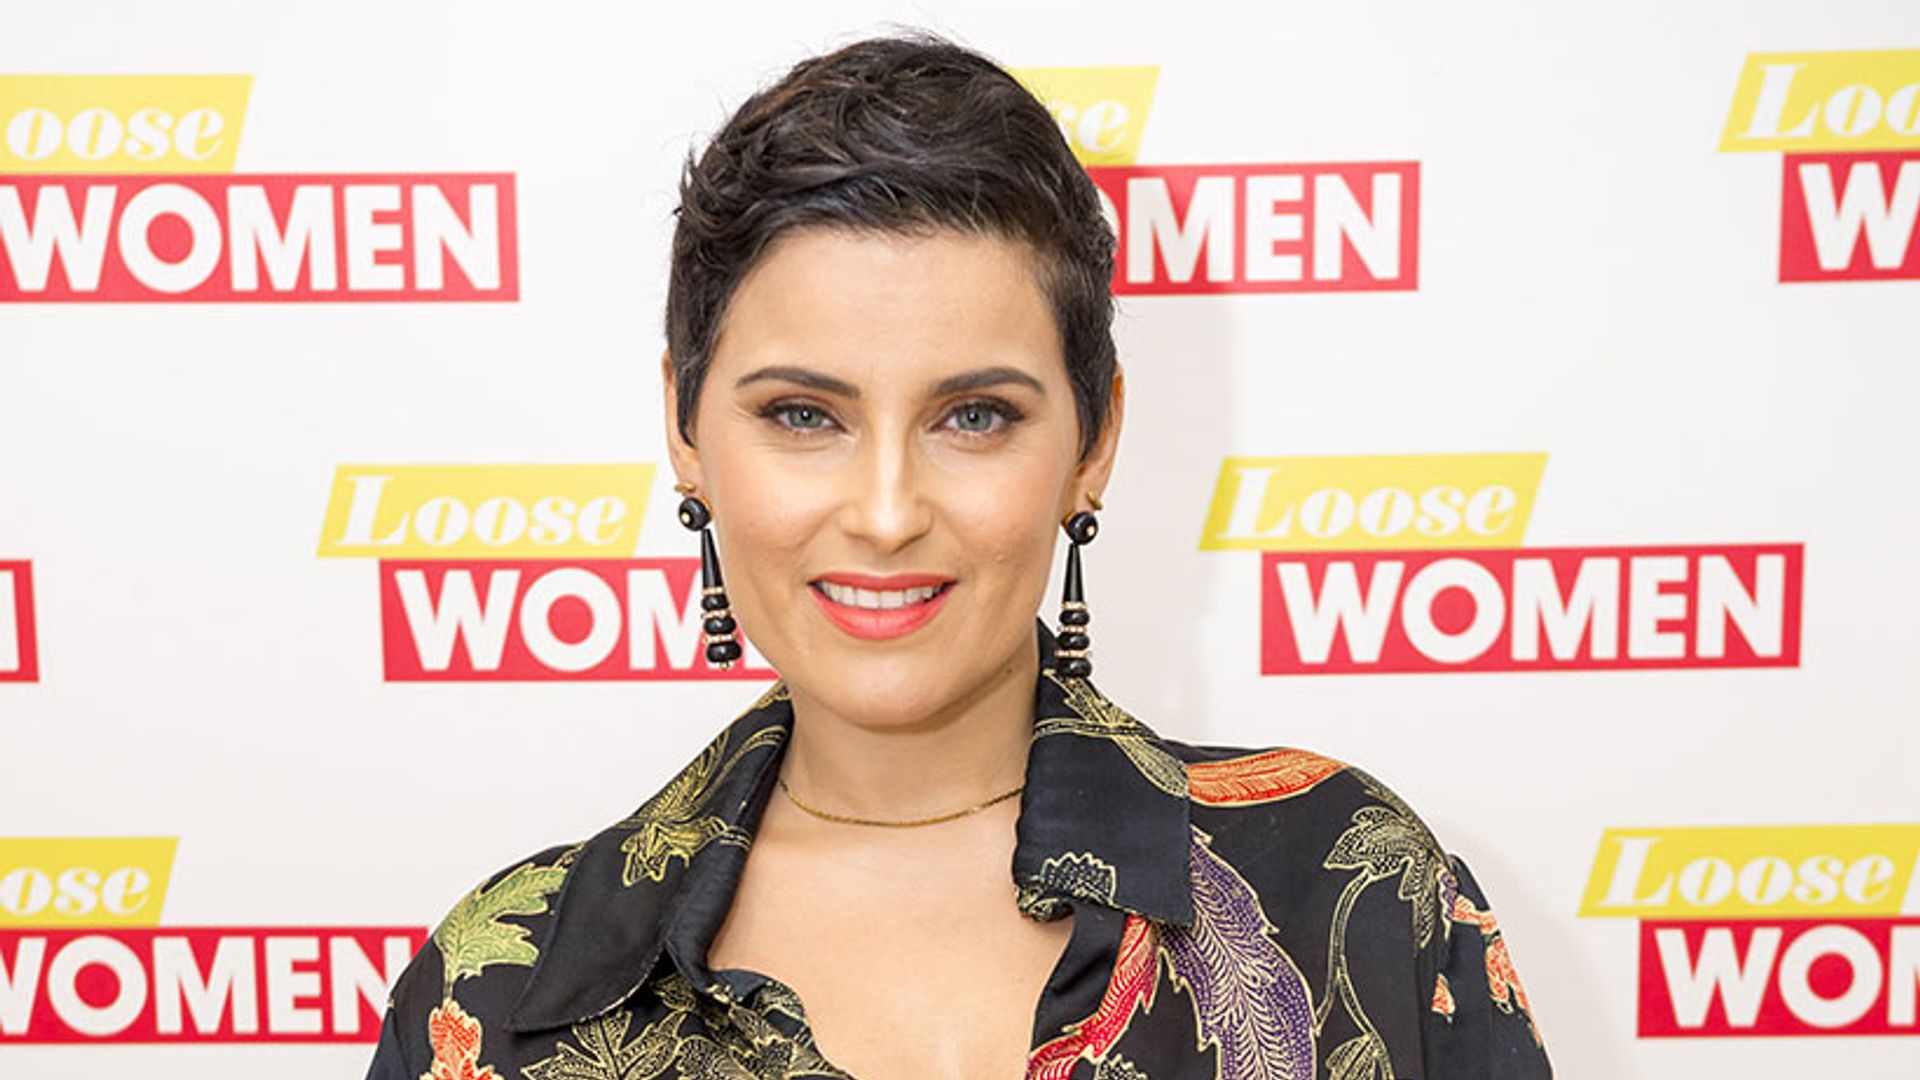 Nelly Furtado reveals split from husband, says she is ready to date